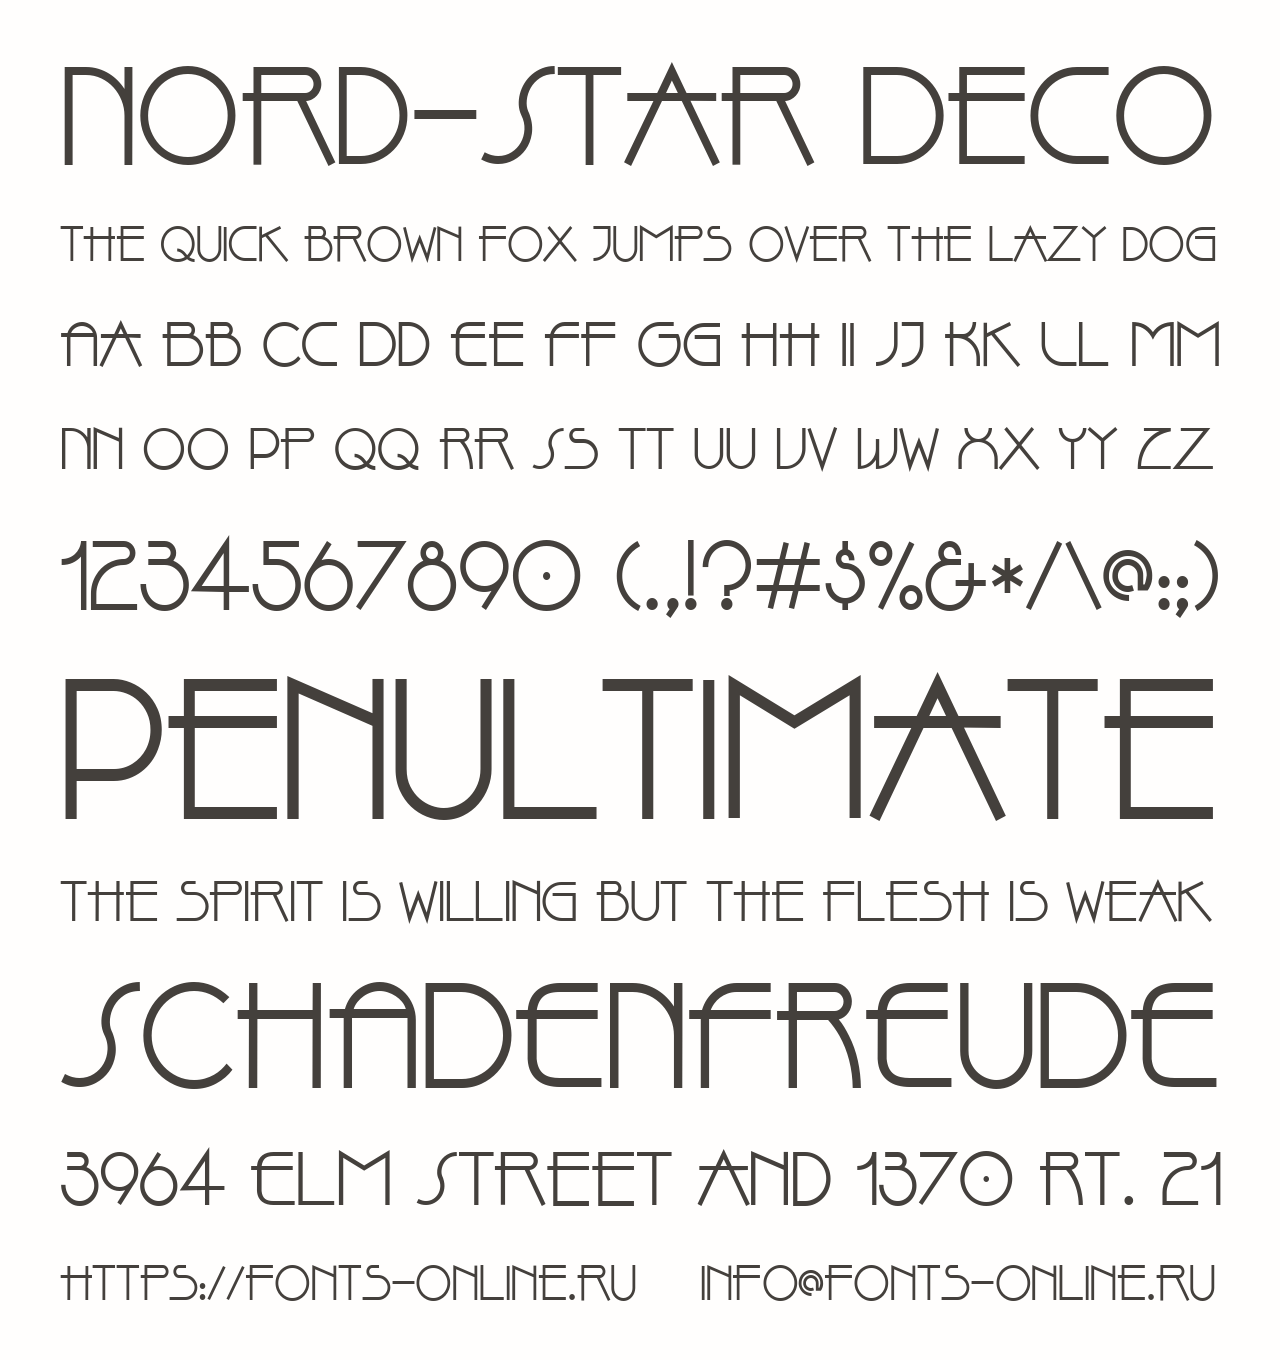 Font Nord-Star Deco